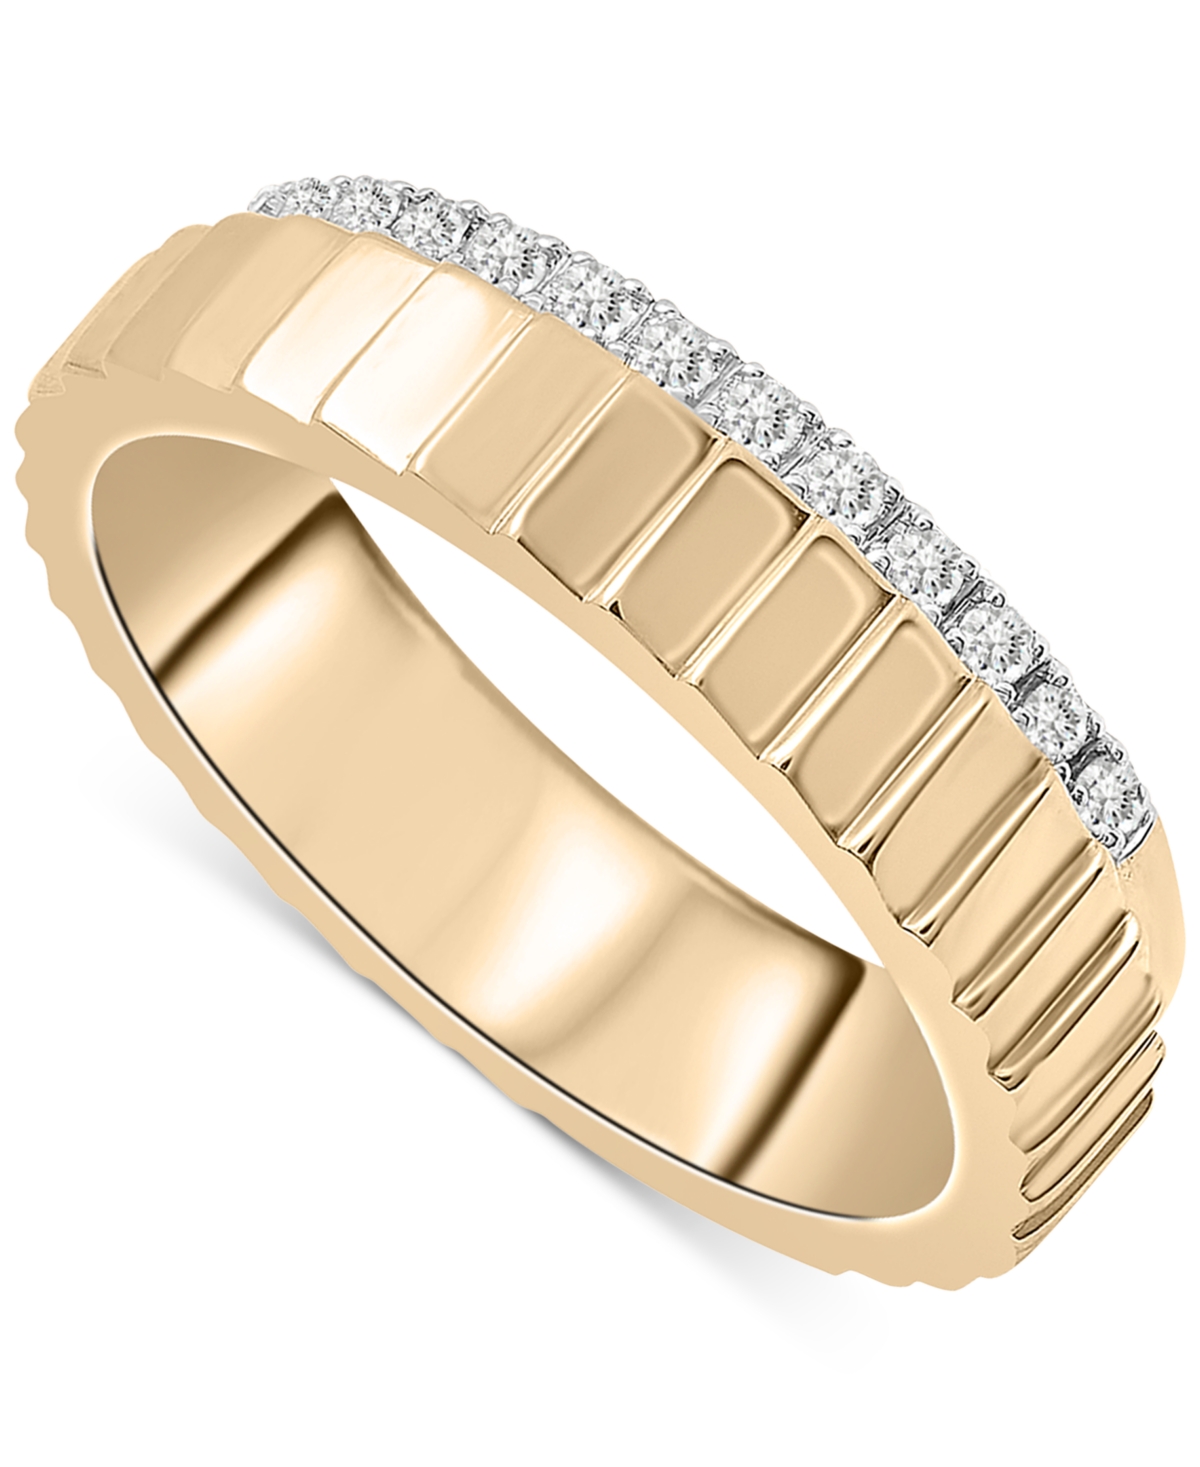 Diamond Textured Bilevel Ring (1/6 ct. t.w.) in Gold Vermeil, Created for Macy's - Gold Vermeil